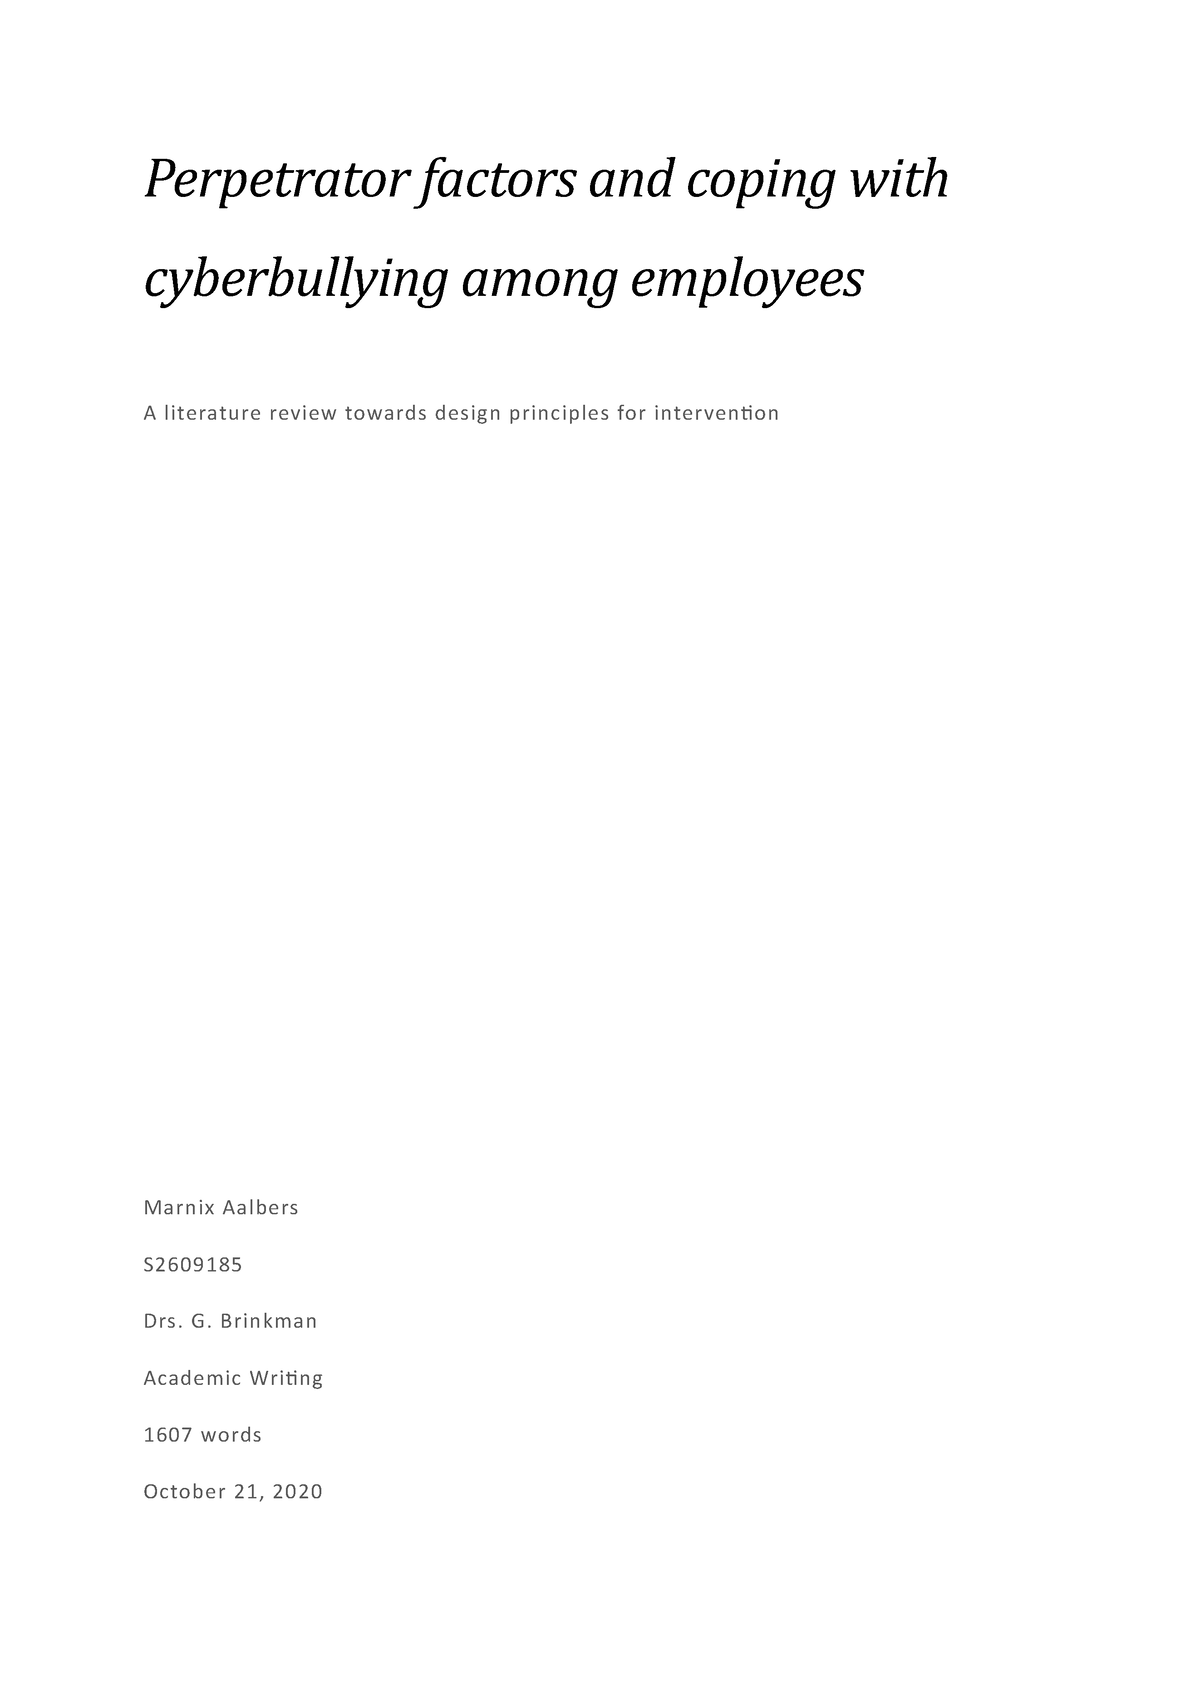 write a literature review about cyberbullying brainly